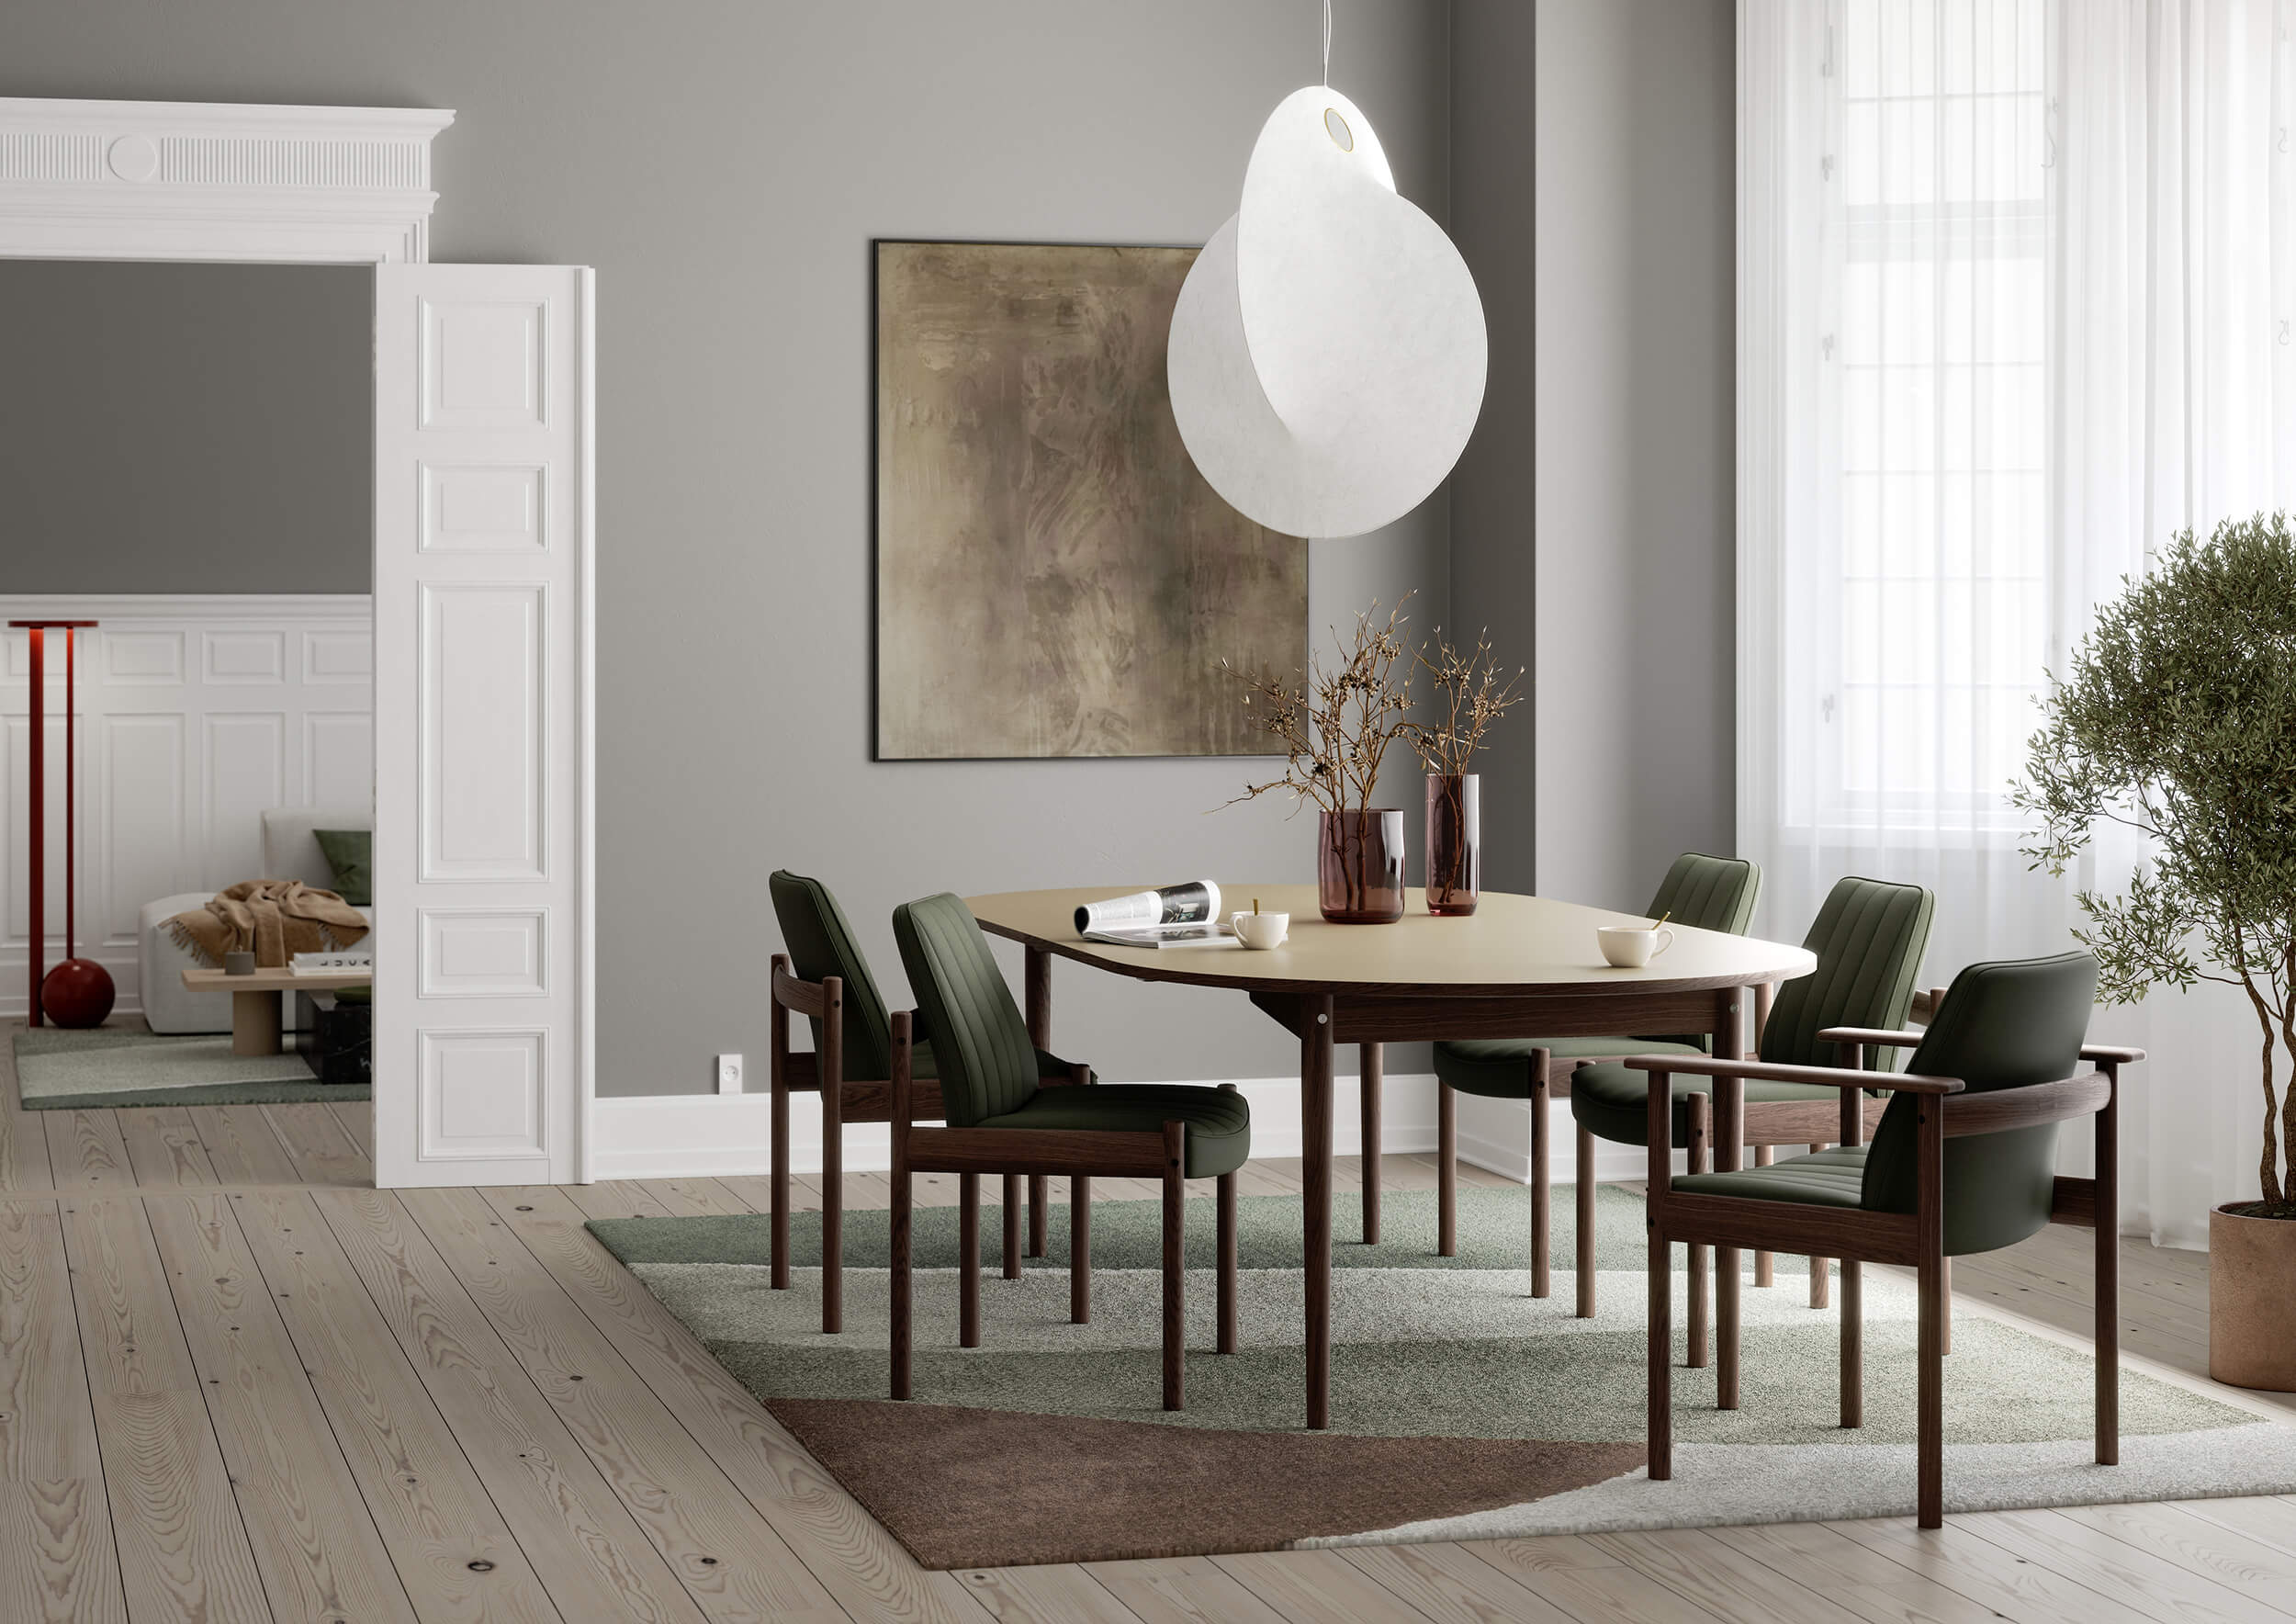 Oma dining table, Ry arm chair